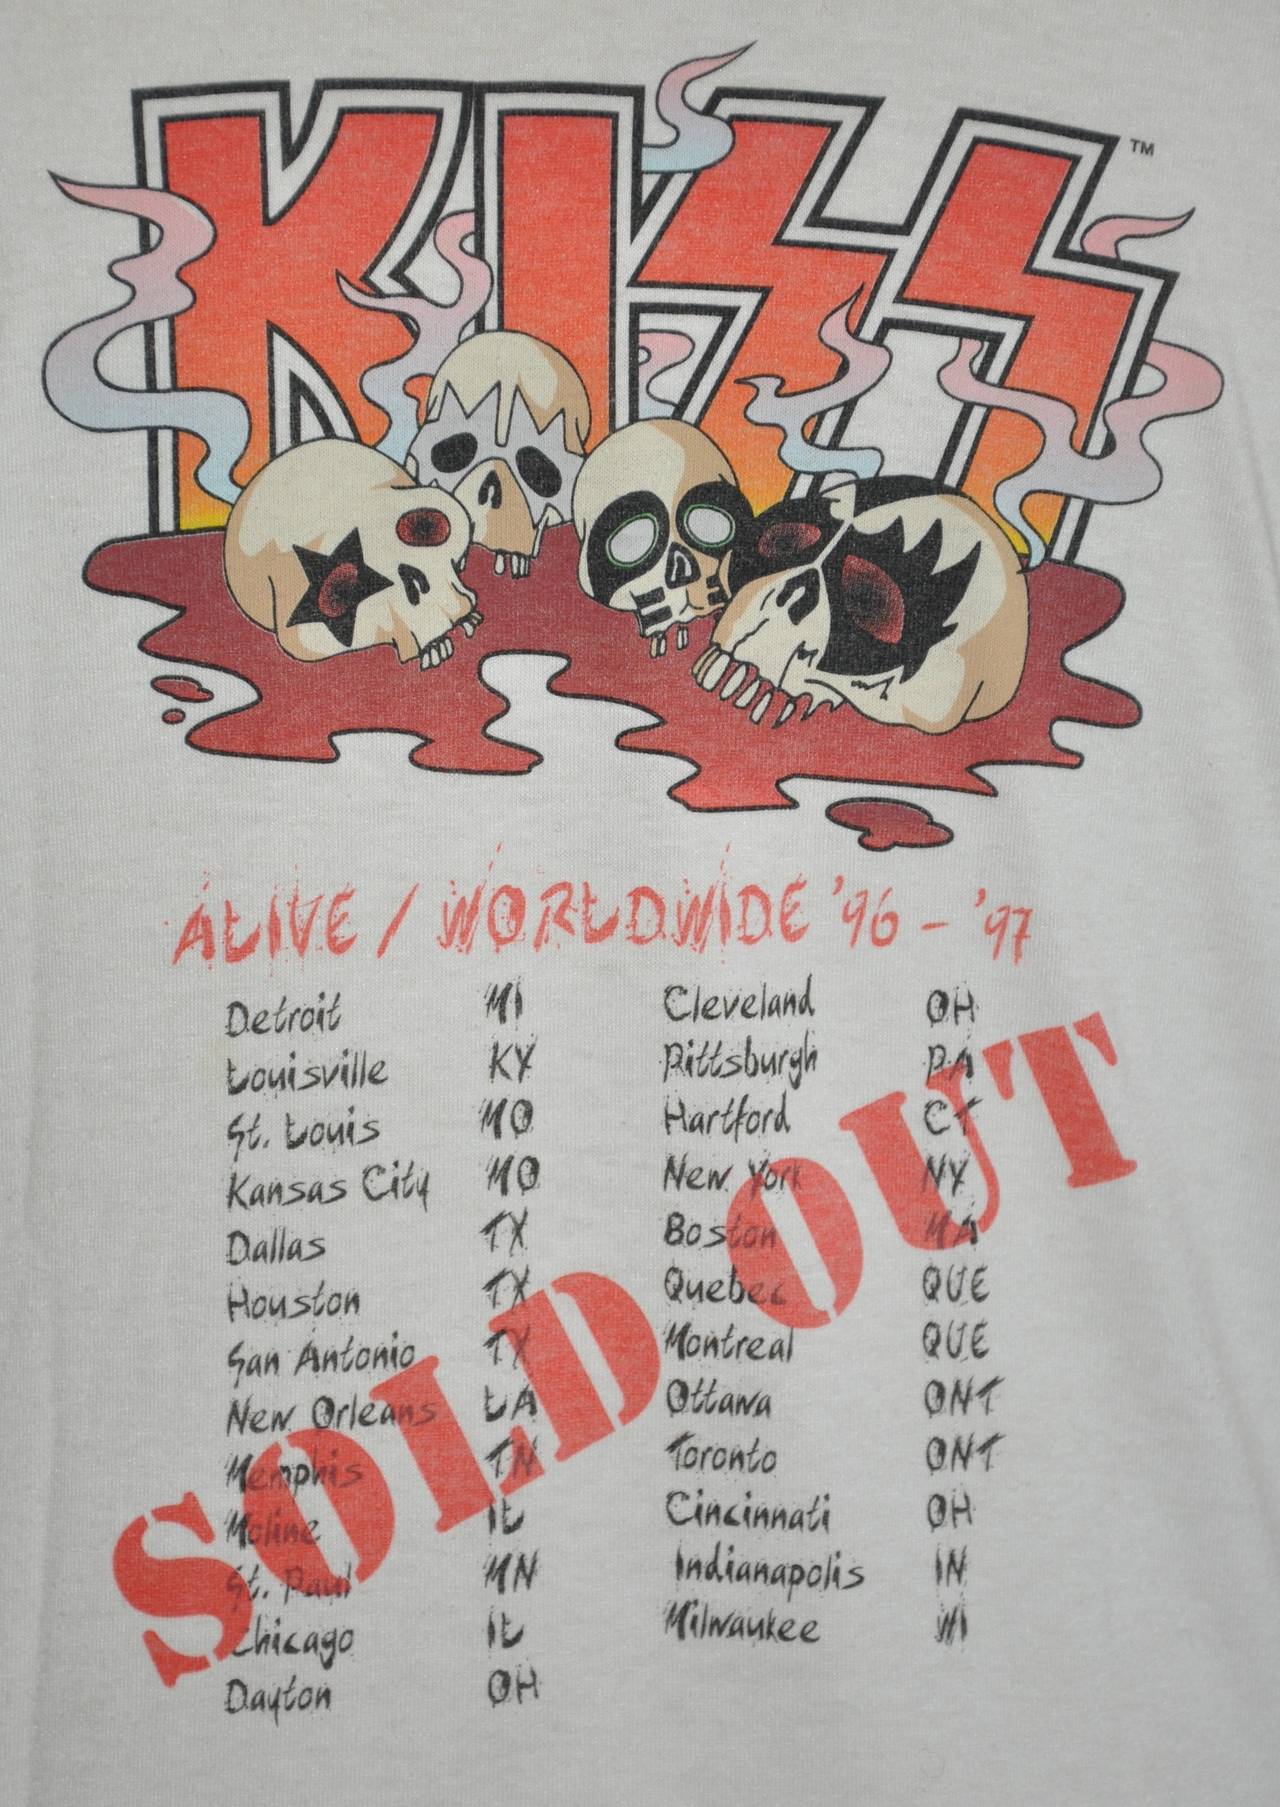 sold out shirt